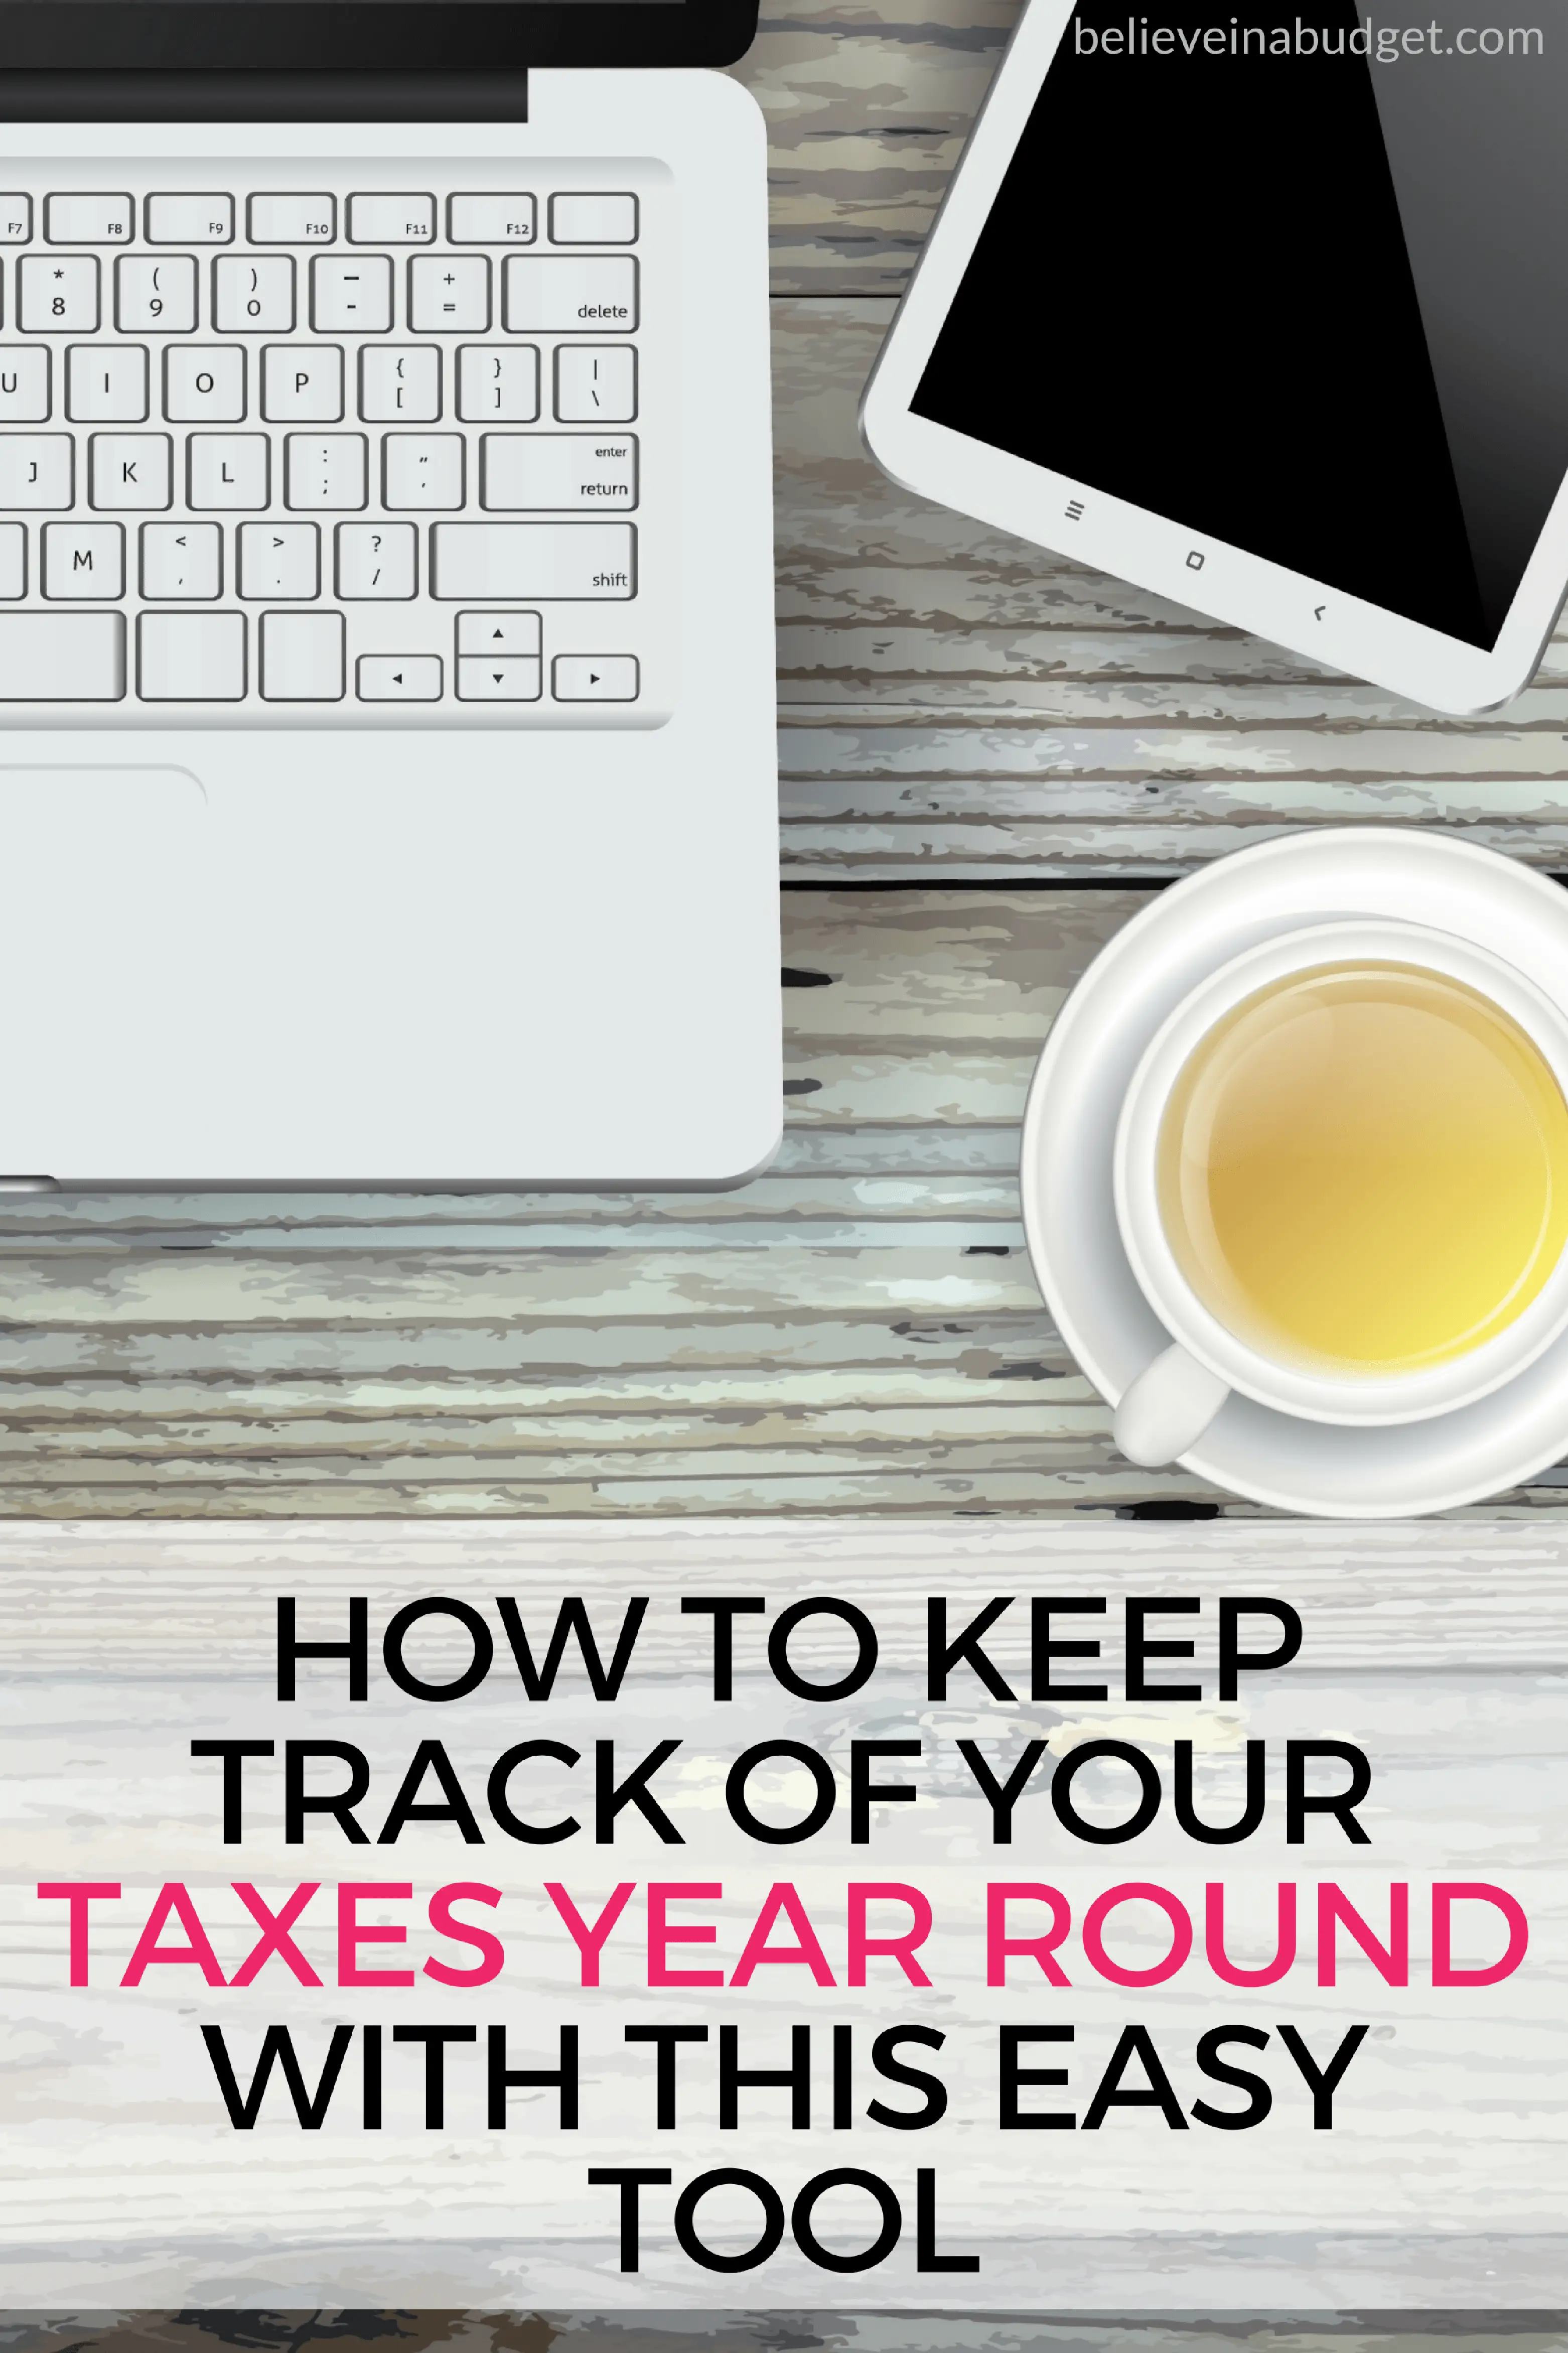 How to Track Your Taxes